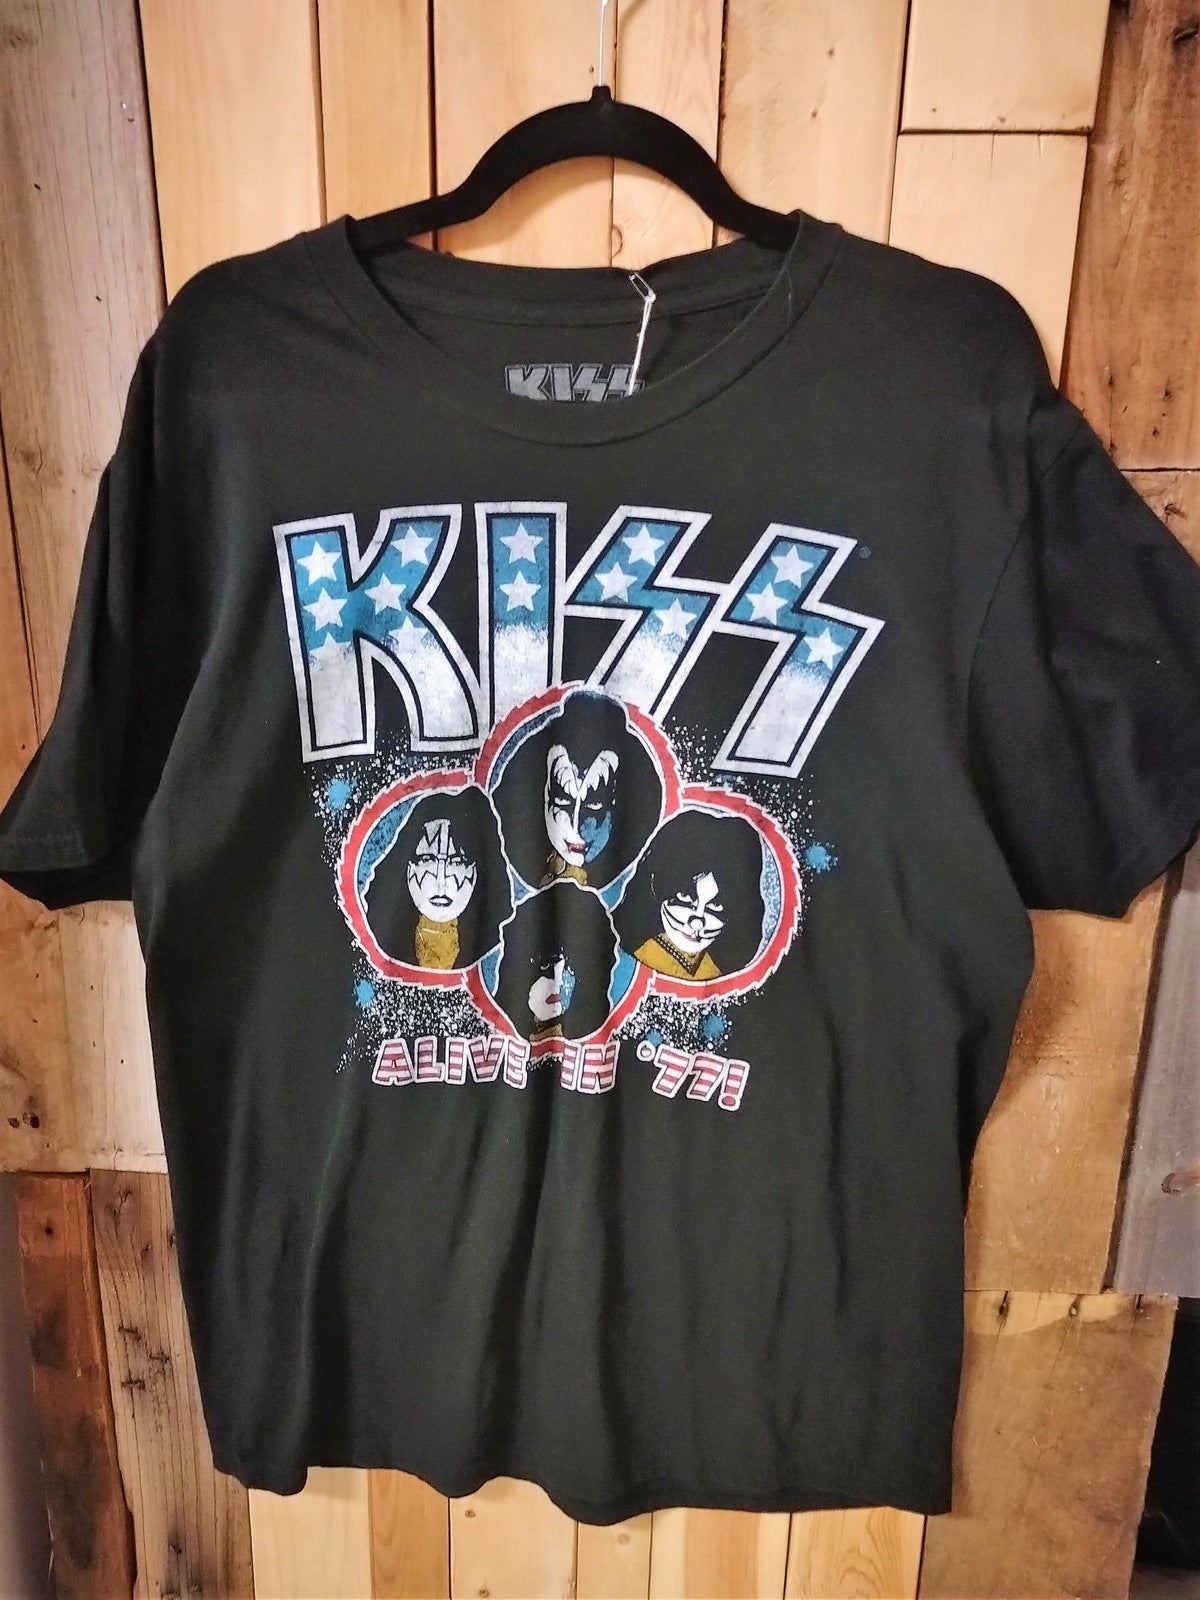 KISS Official Merchandise "Alive in '77" T Shirt Size Large